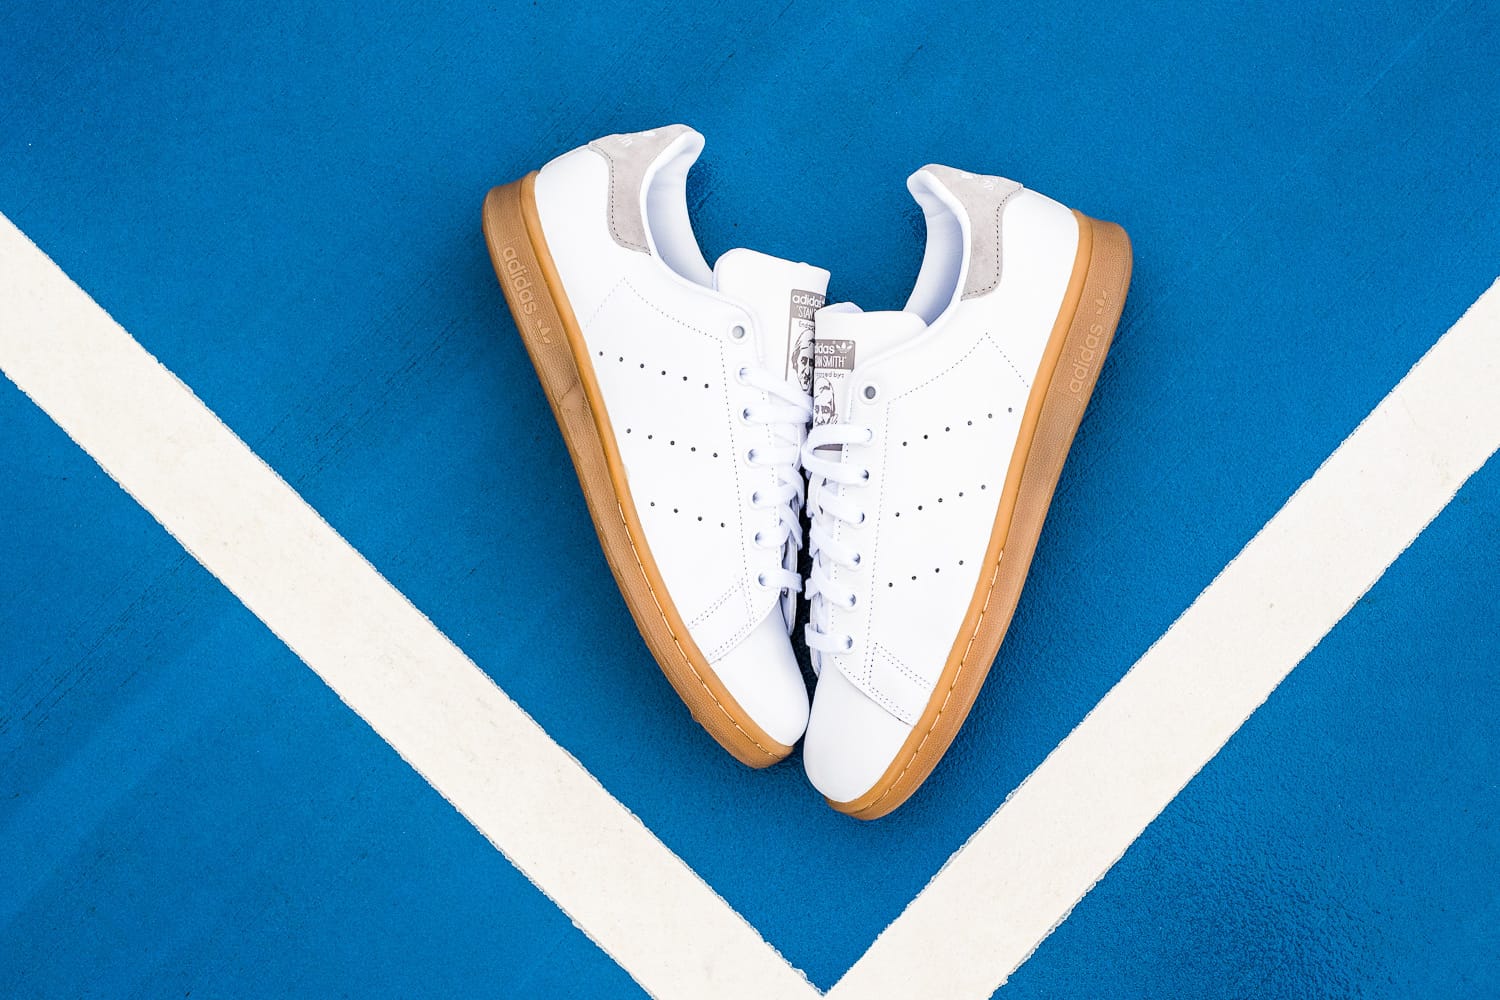 adidas stan smith with gum sole